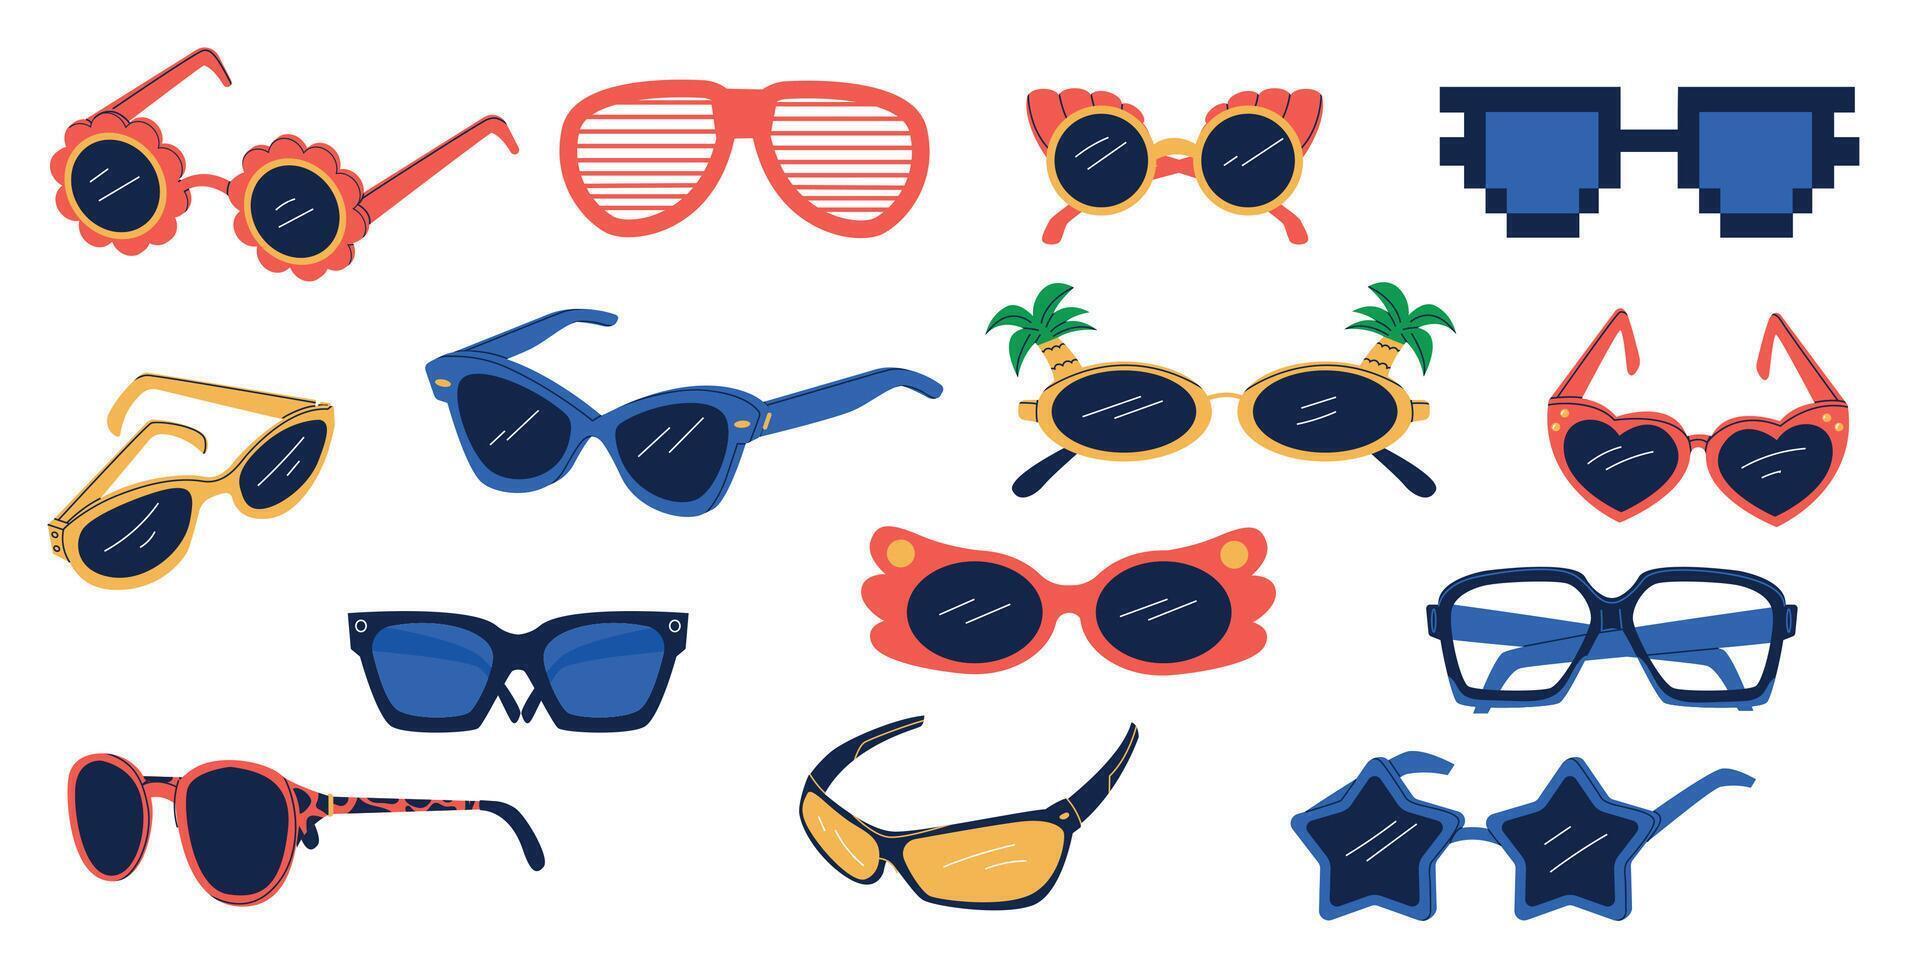 Party glasses. Funny sunglasses hippy groovy psychedelic retro style, cartoon geometric fashion eyewear icons different frames and forms. Vector collection